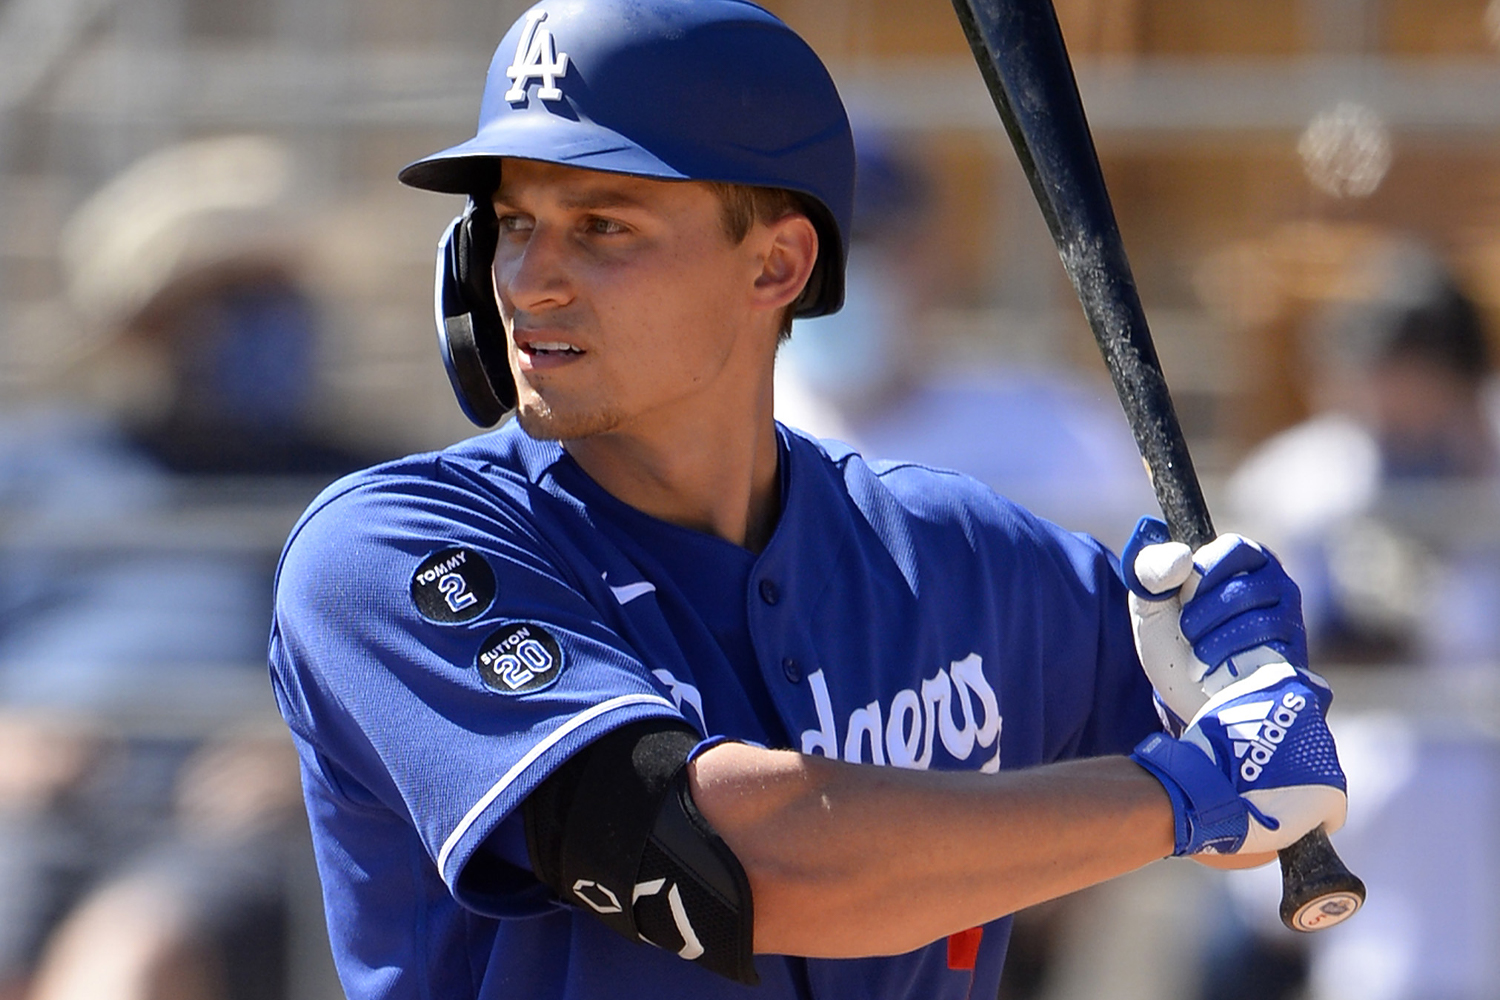 Corey Seager #5 of the Los Angeles Dodgers bats against the Chicago White Sox on March 8, 2021 at Camelback Ranch in Glendale, Arizona